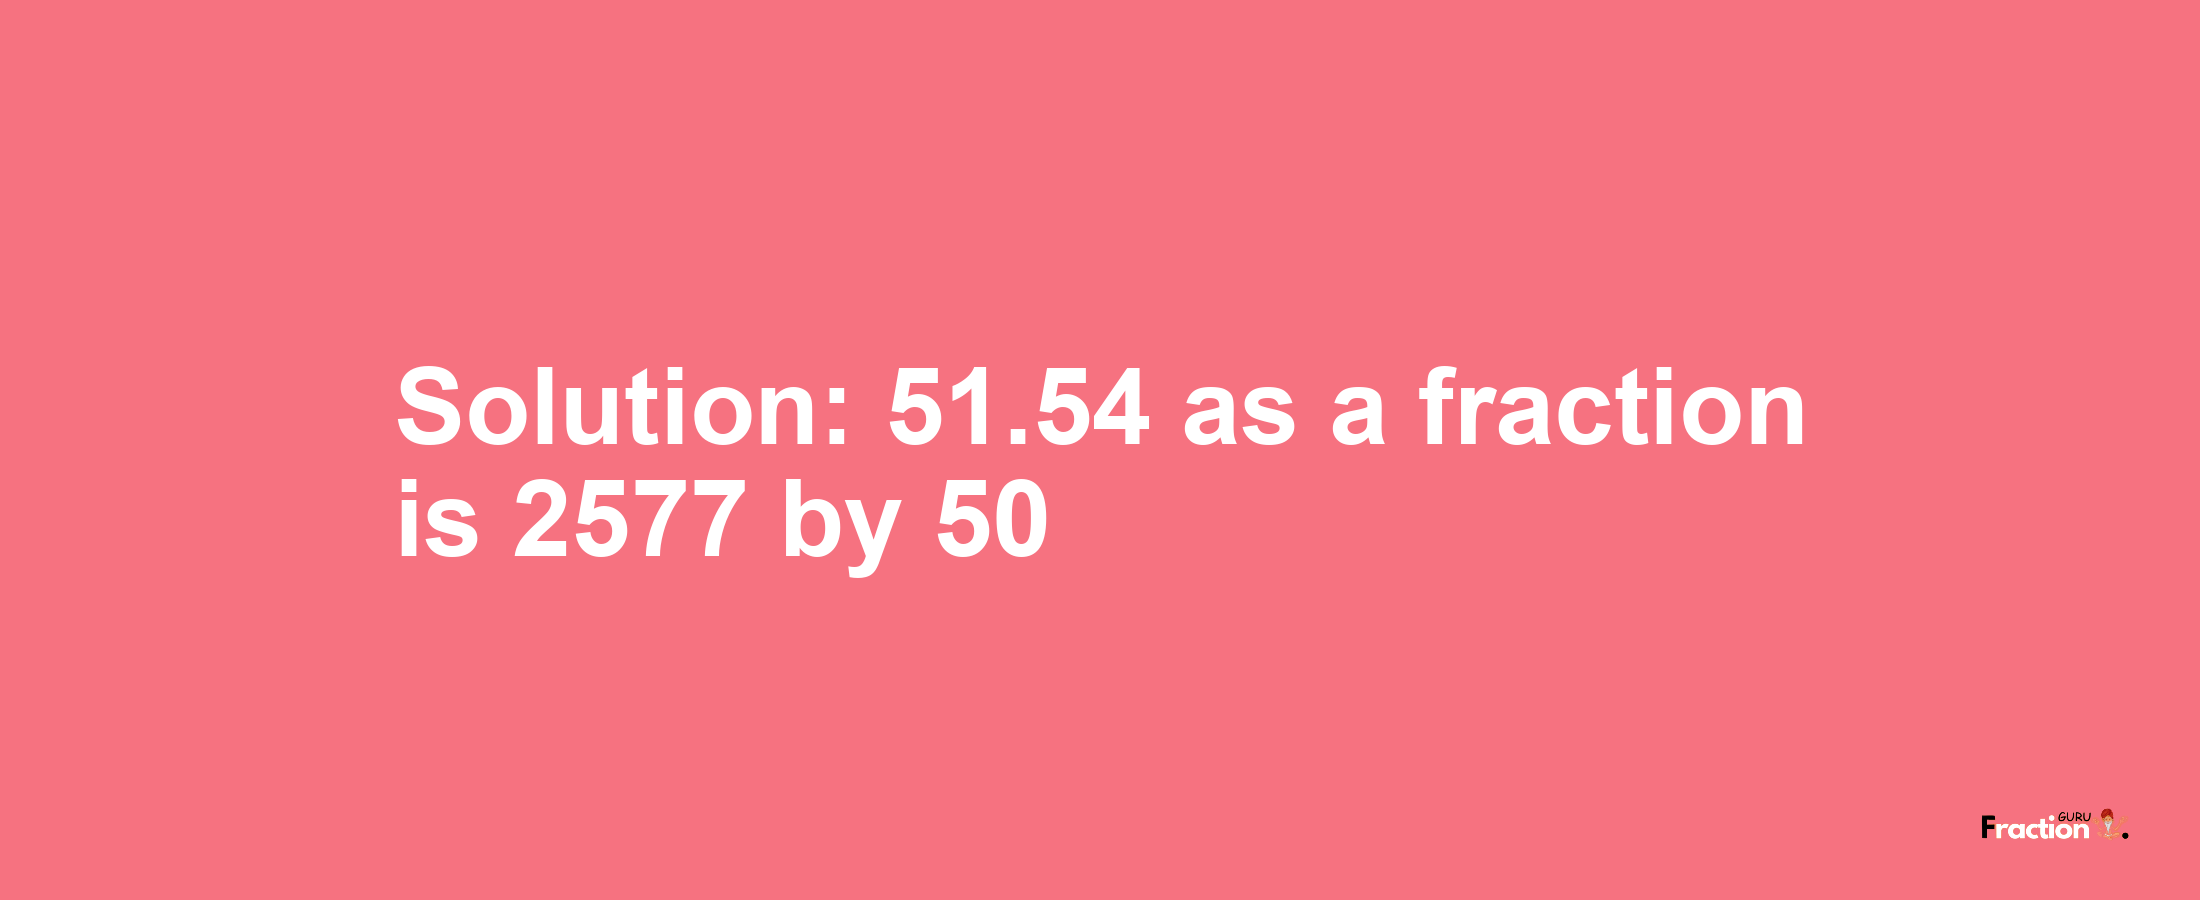 Solution:51.54 as a fraction is 2577/50